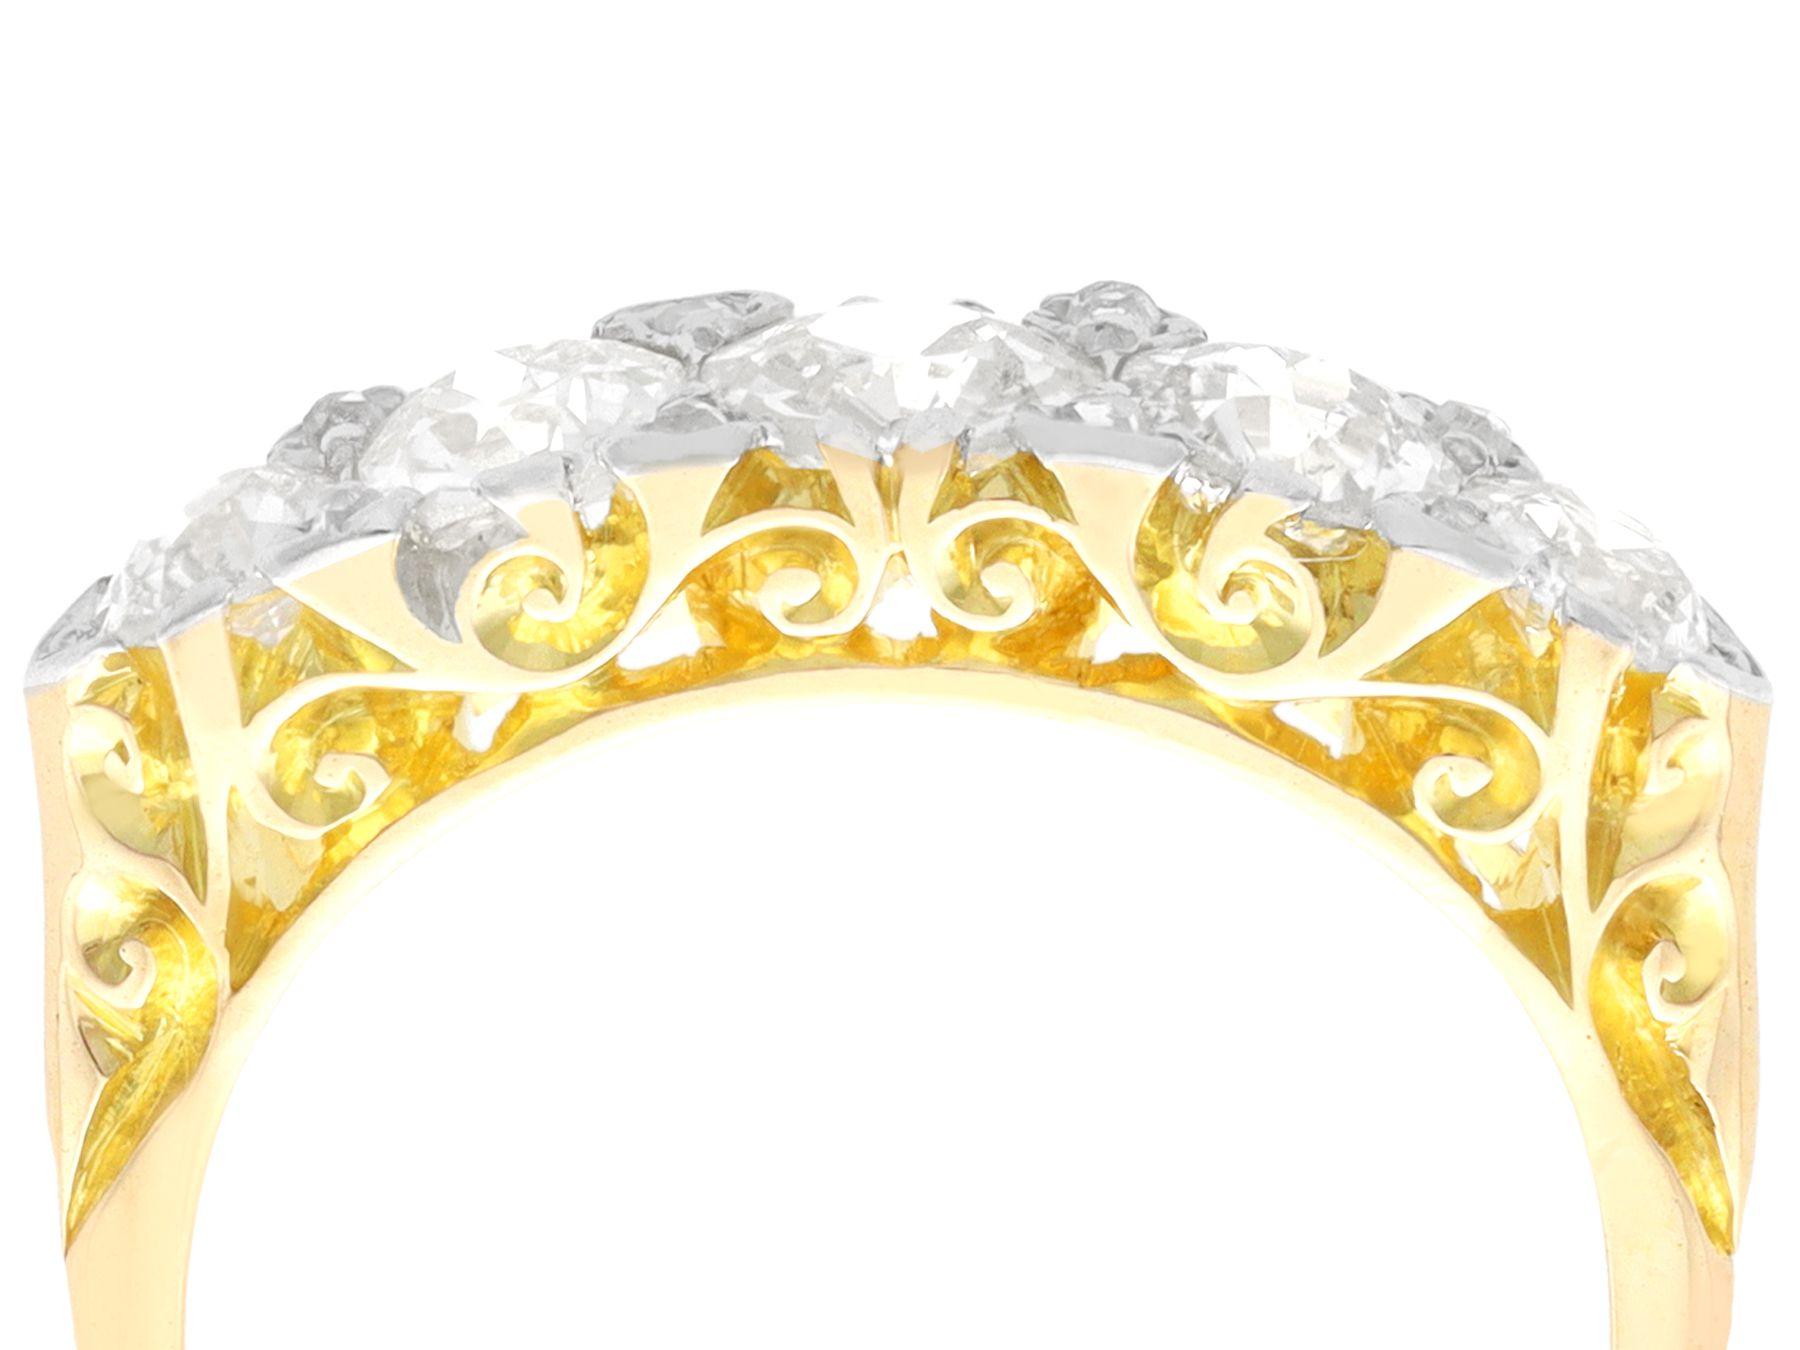 A stunning, fine and impressive 1.83 carat diamond, 18 karat yellow gold and platinum five stone ring; part of our diverse antique jewellery and estate jewelry collections

This fine and impressive gold five stone diamond ring has been crafted in